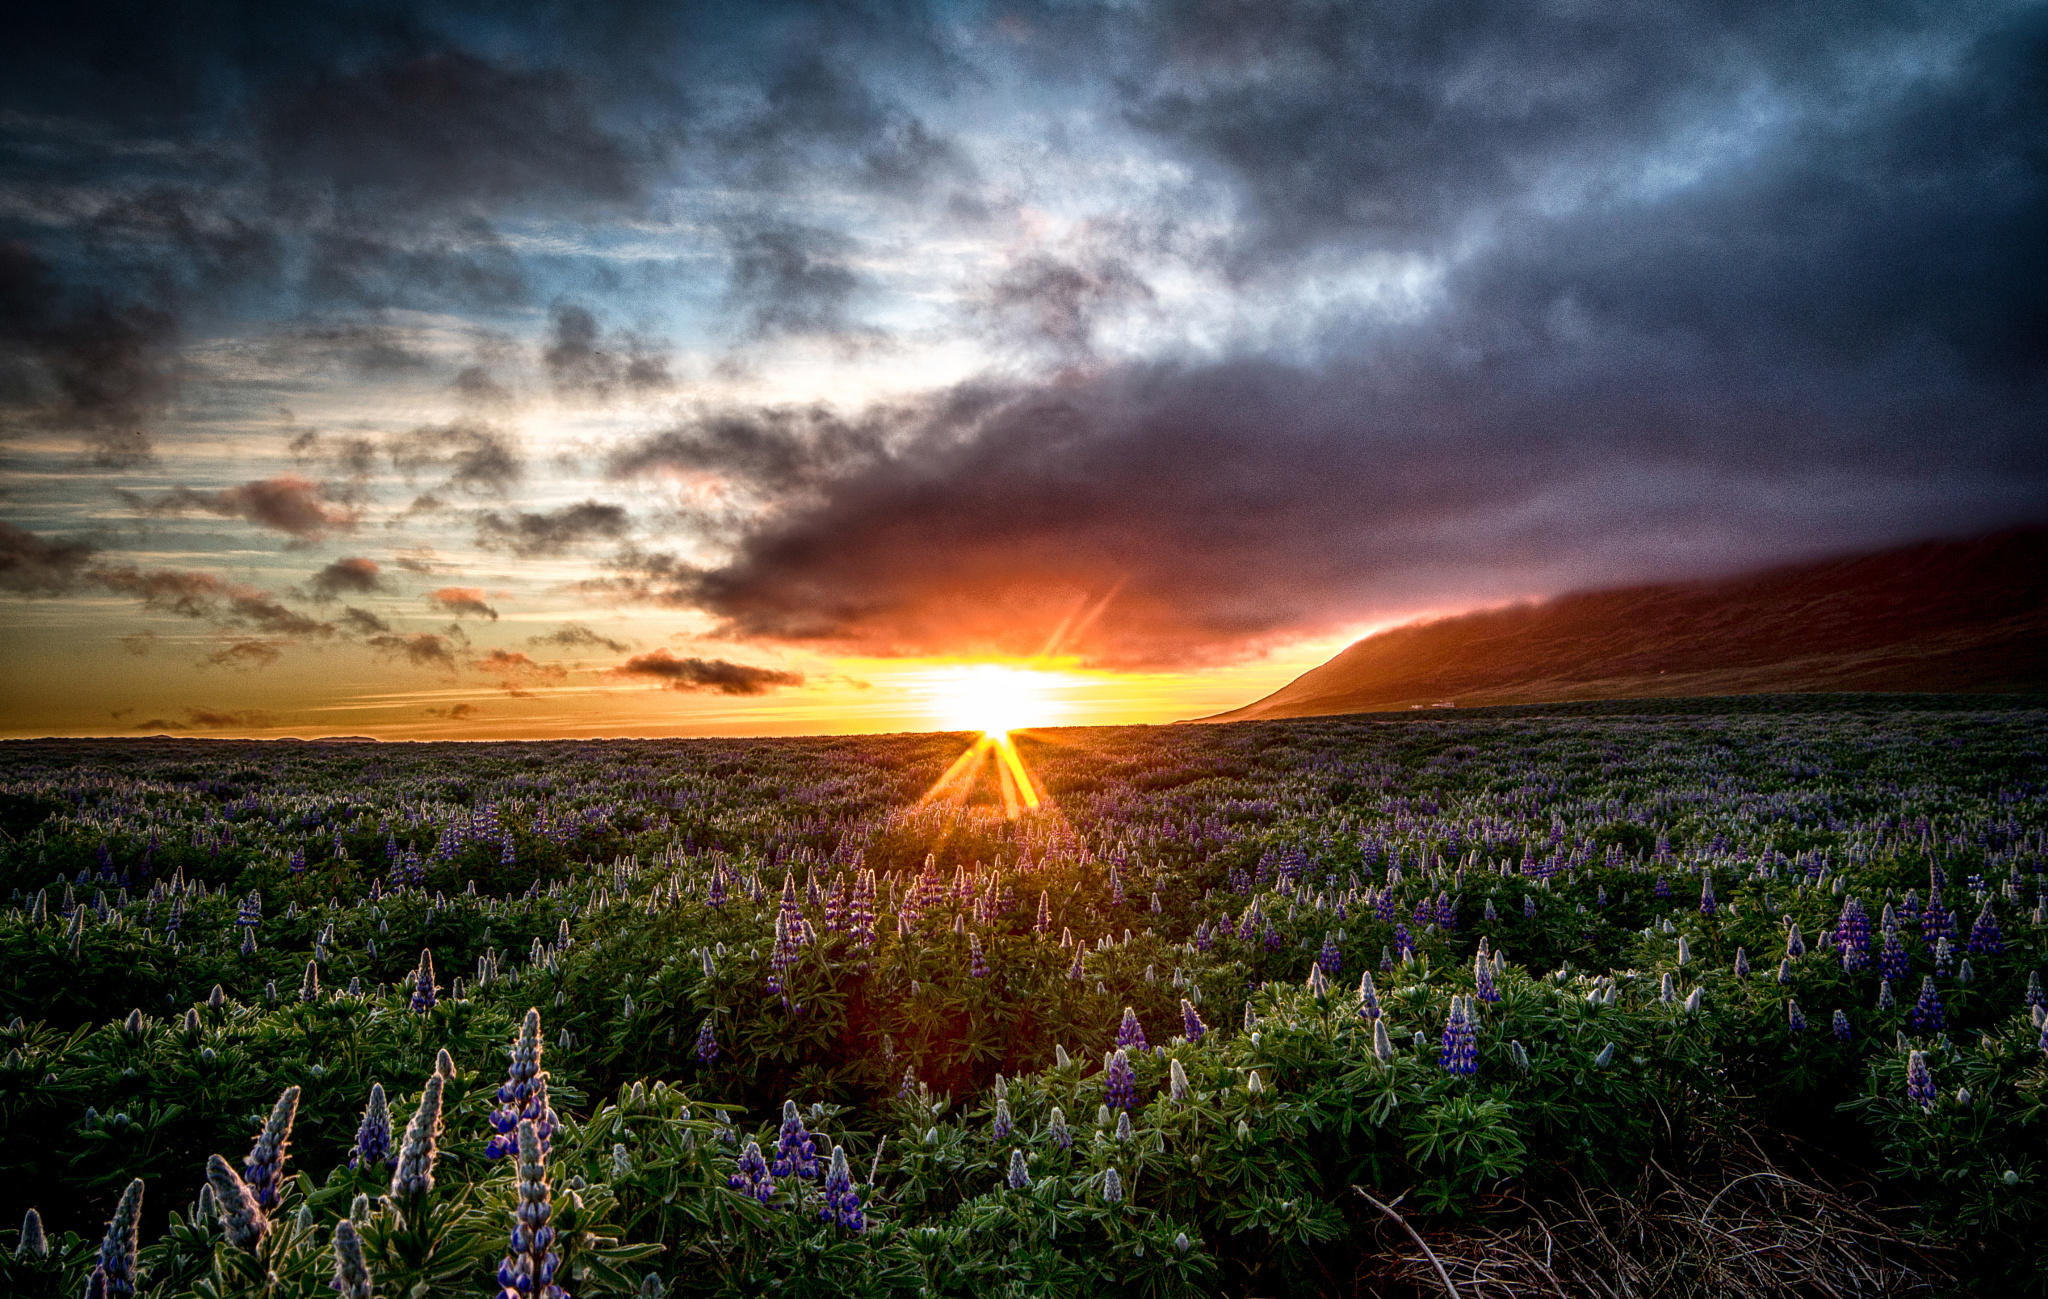 Sunset & Lupine field in Iceland